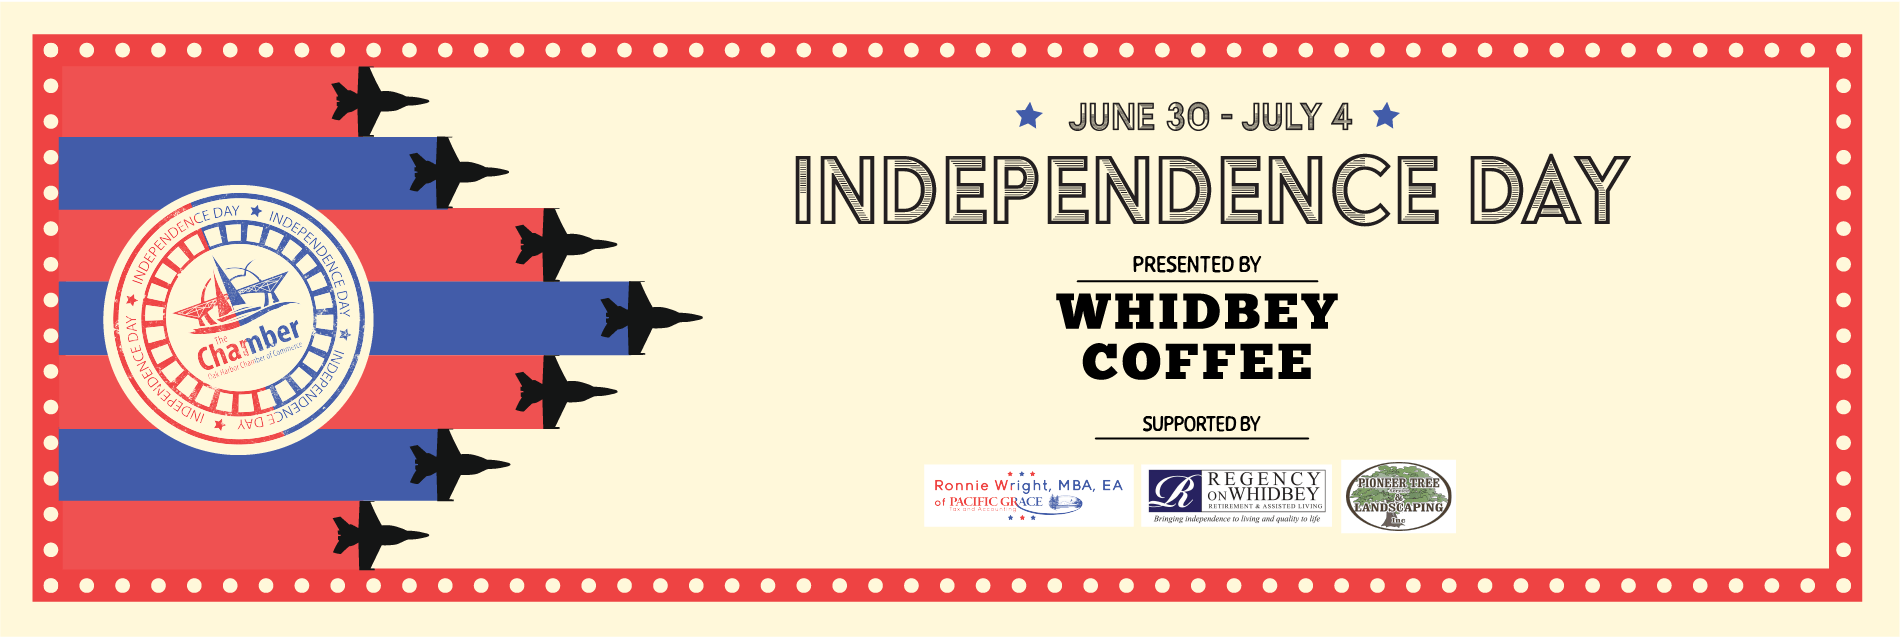 Independence Day Celebration! July 1 - 4. Presented by Whidbey Coffee. Supported by, Ronnie Wright, Regency on Whidbey, and Pioneer Tree Service.